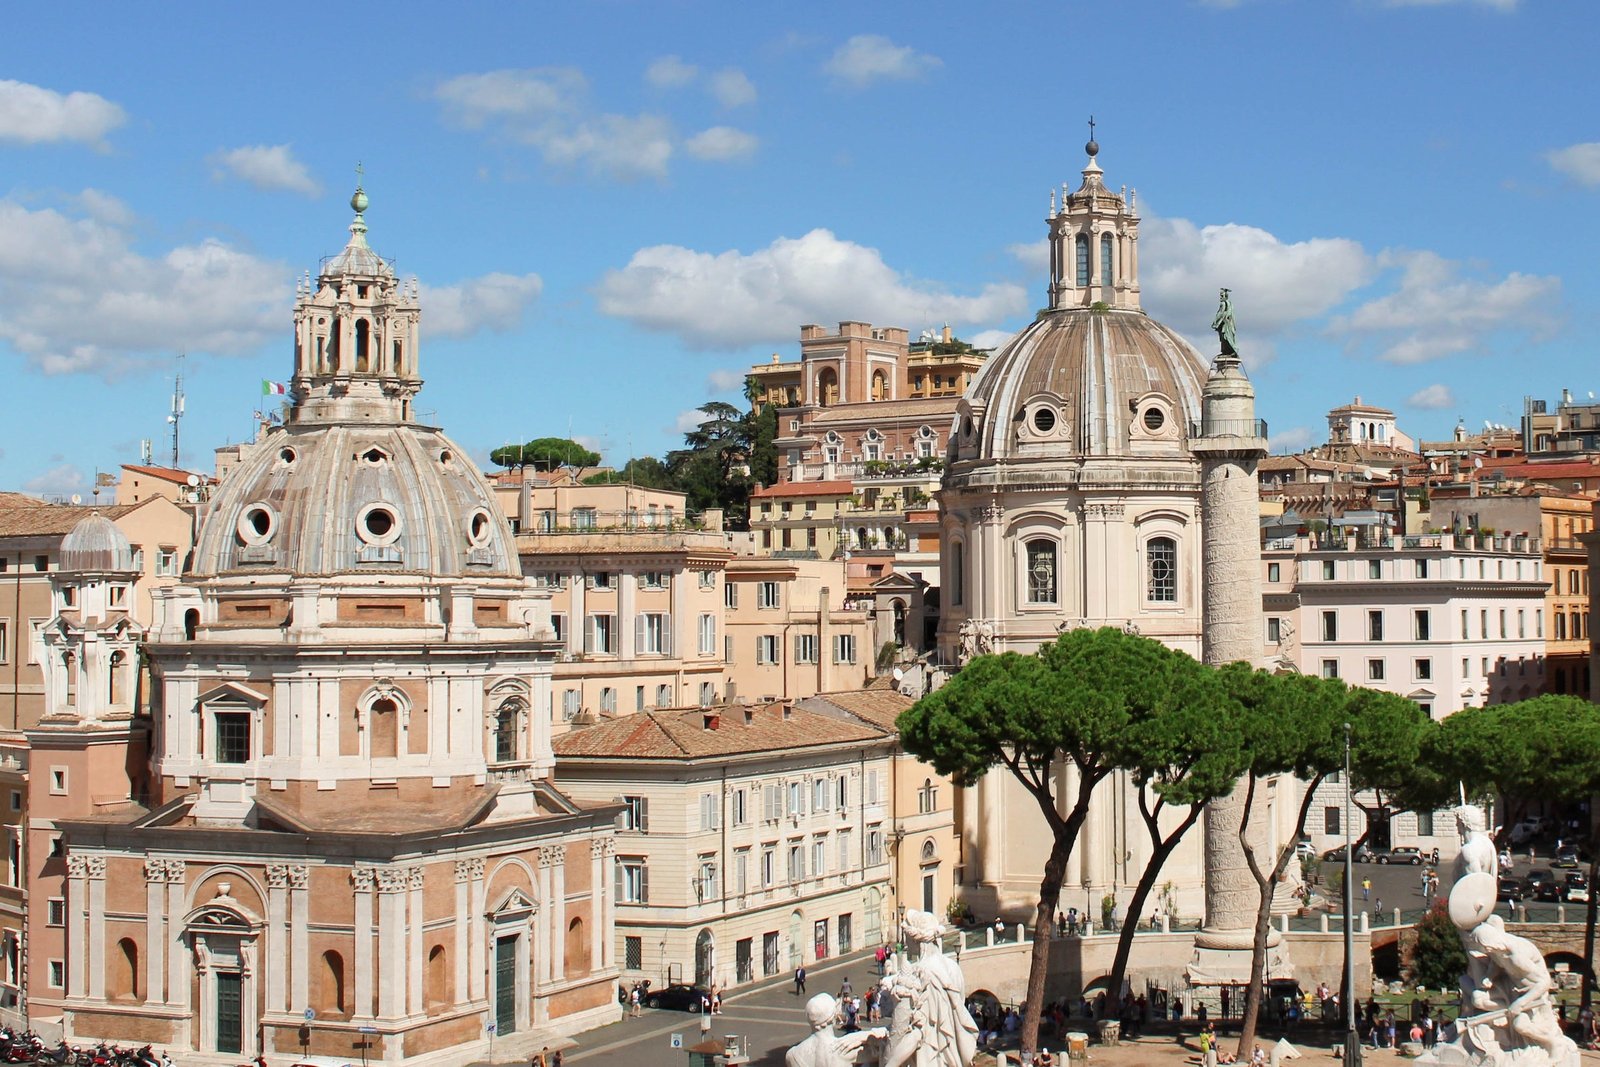 Attractions and things to do in Rome